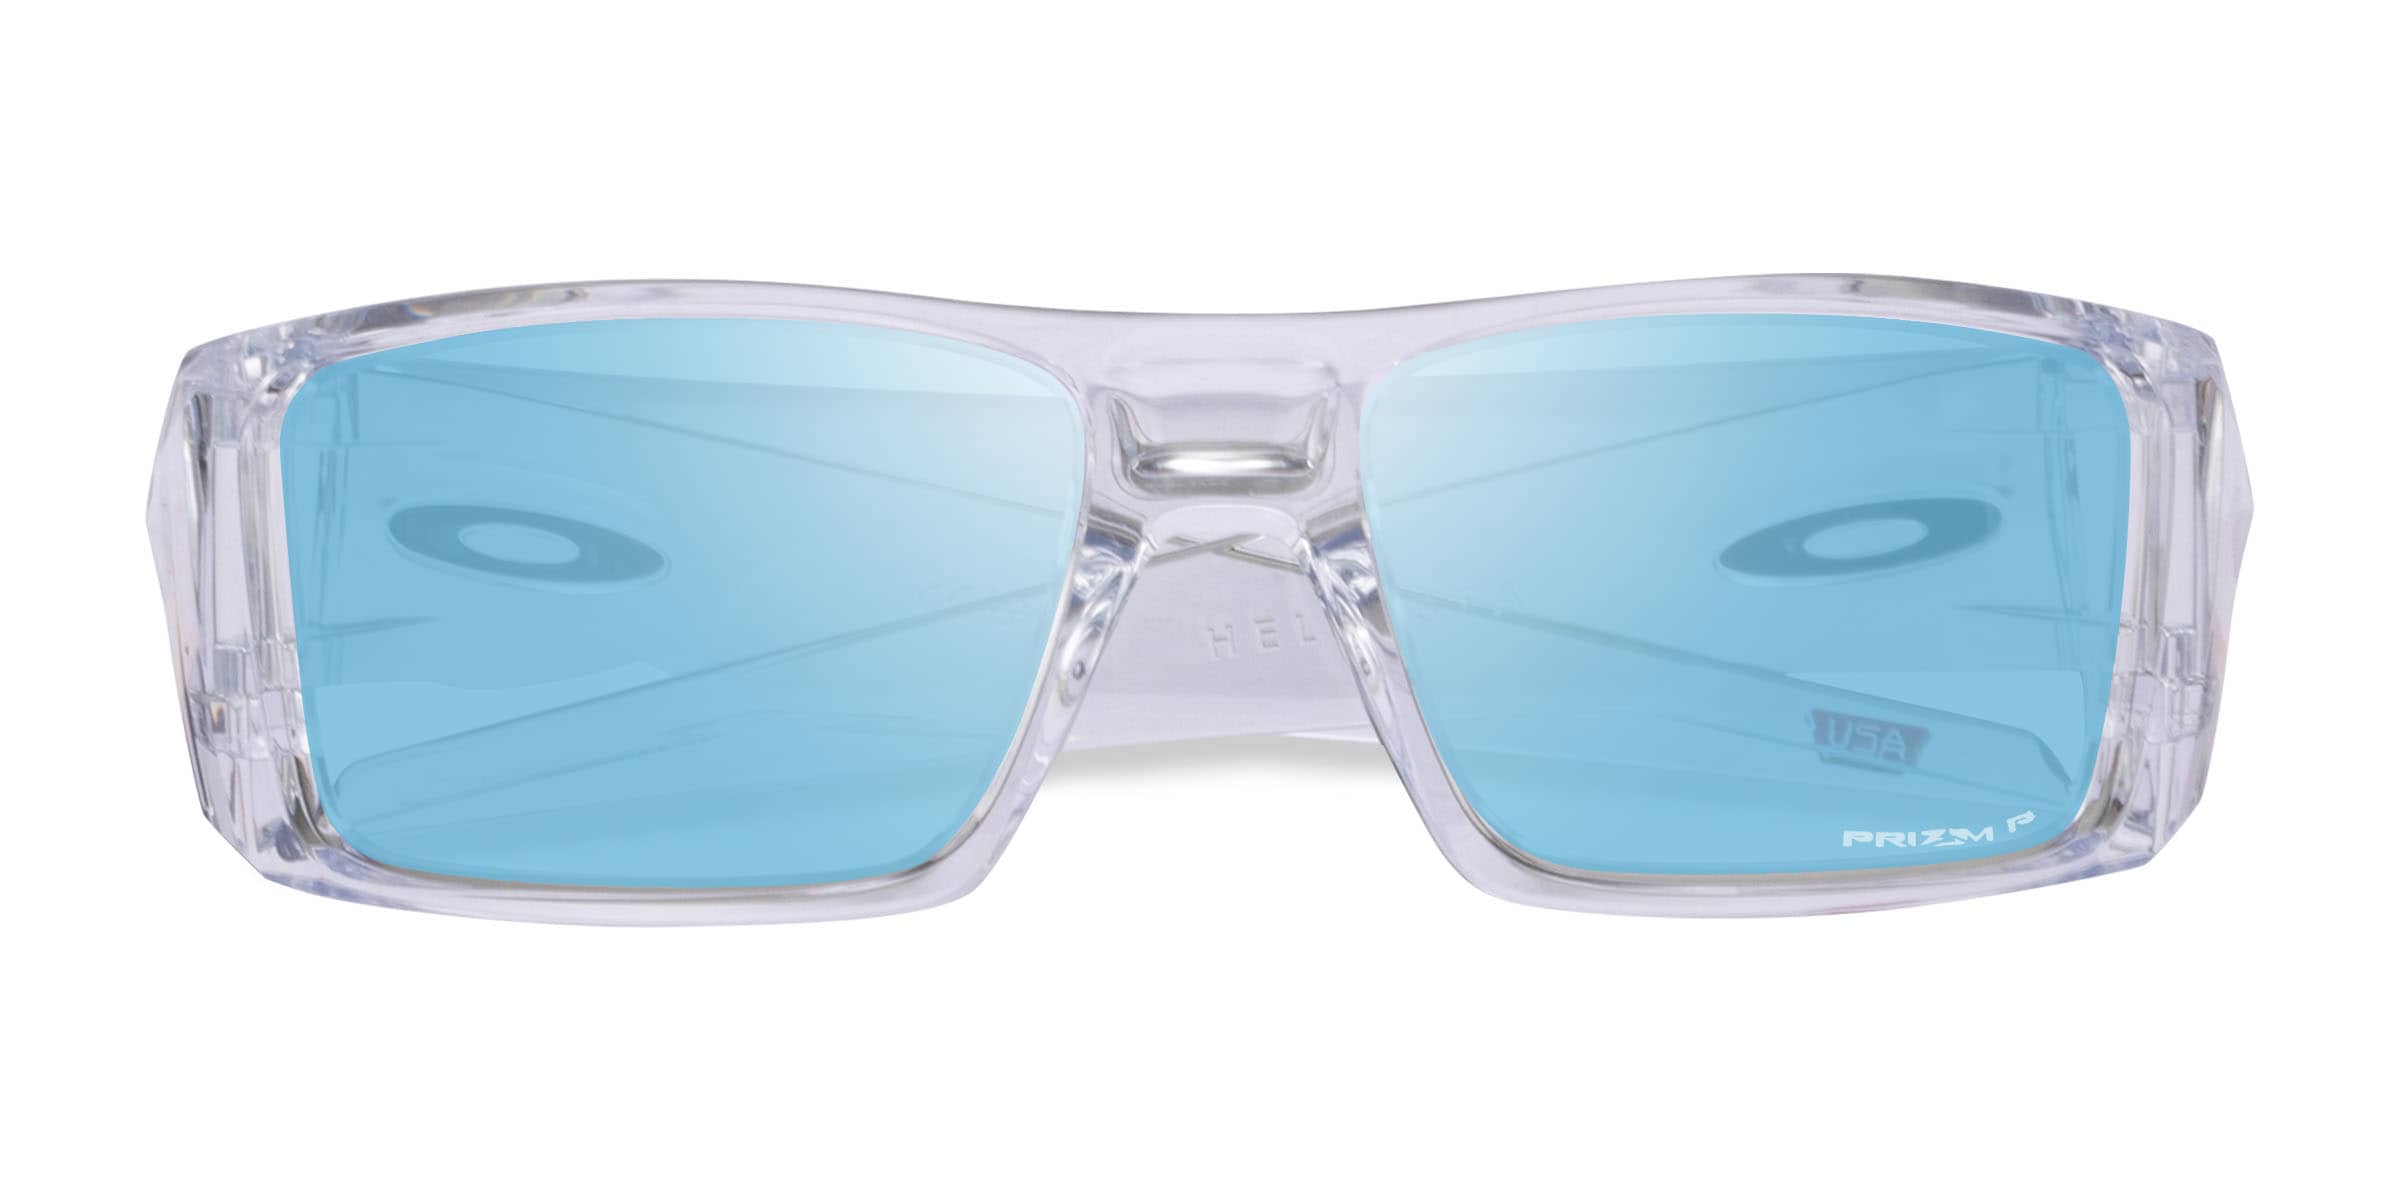 Oakley Men UV Protected Blue Lens Round Sunglasses - 0OO9374 : Amazon.in:  Fashion